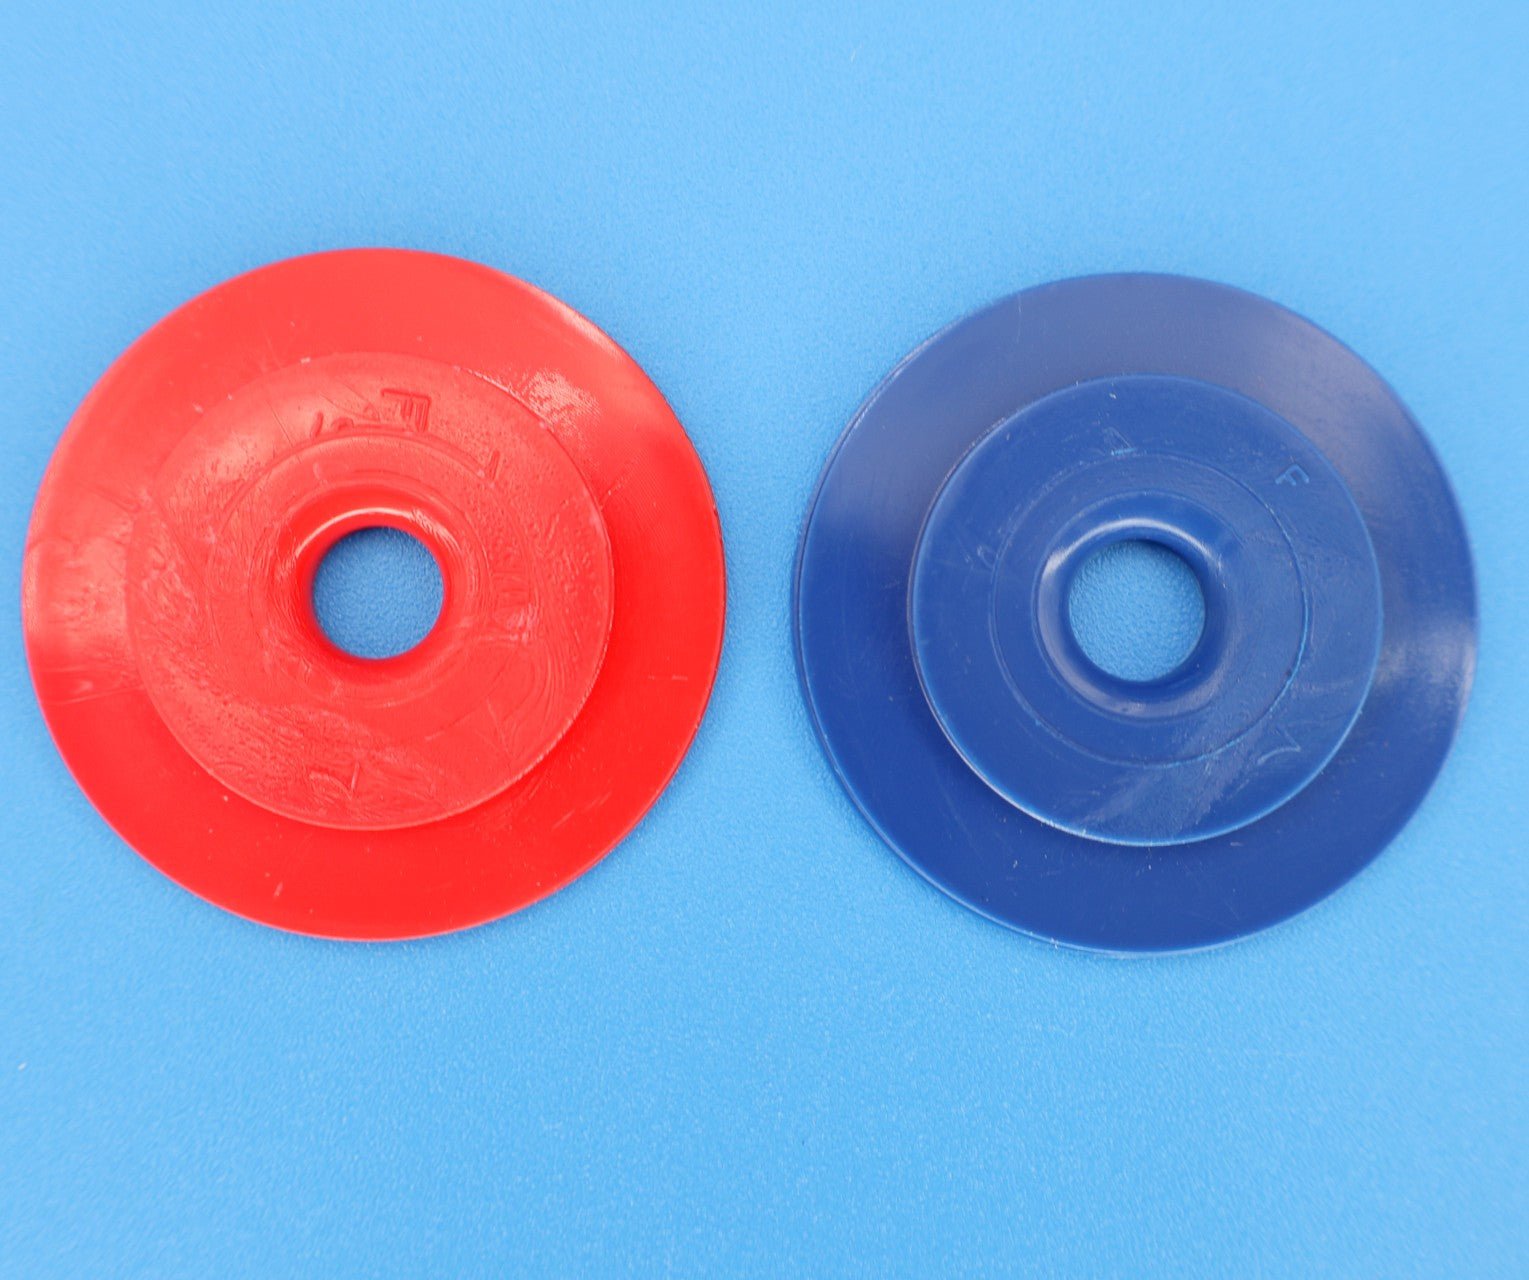 Jandy (Polaris) Vac-Sweep Red & Blue Restrictor Disk for Wall Fittings 10-112-00 - Cleaner Parts - img-3